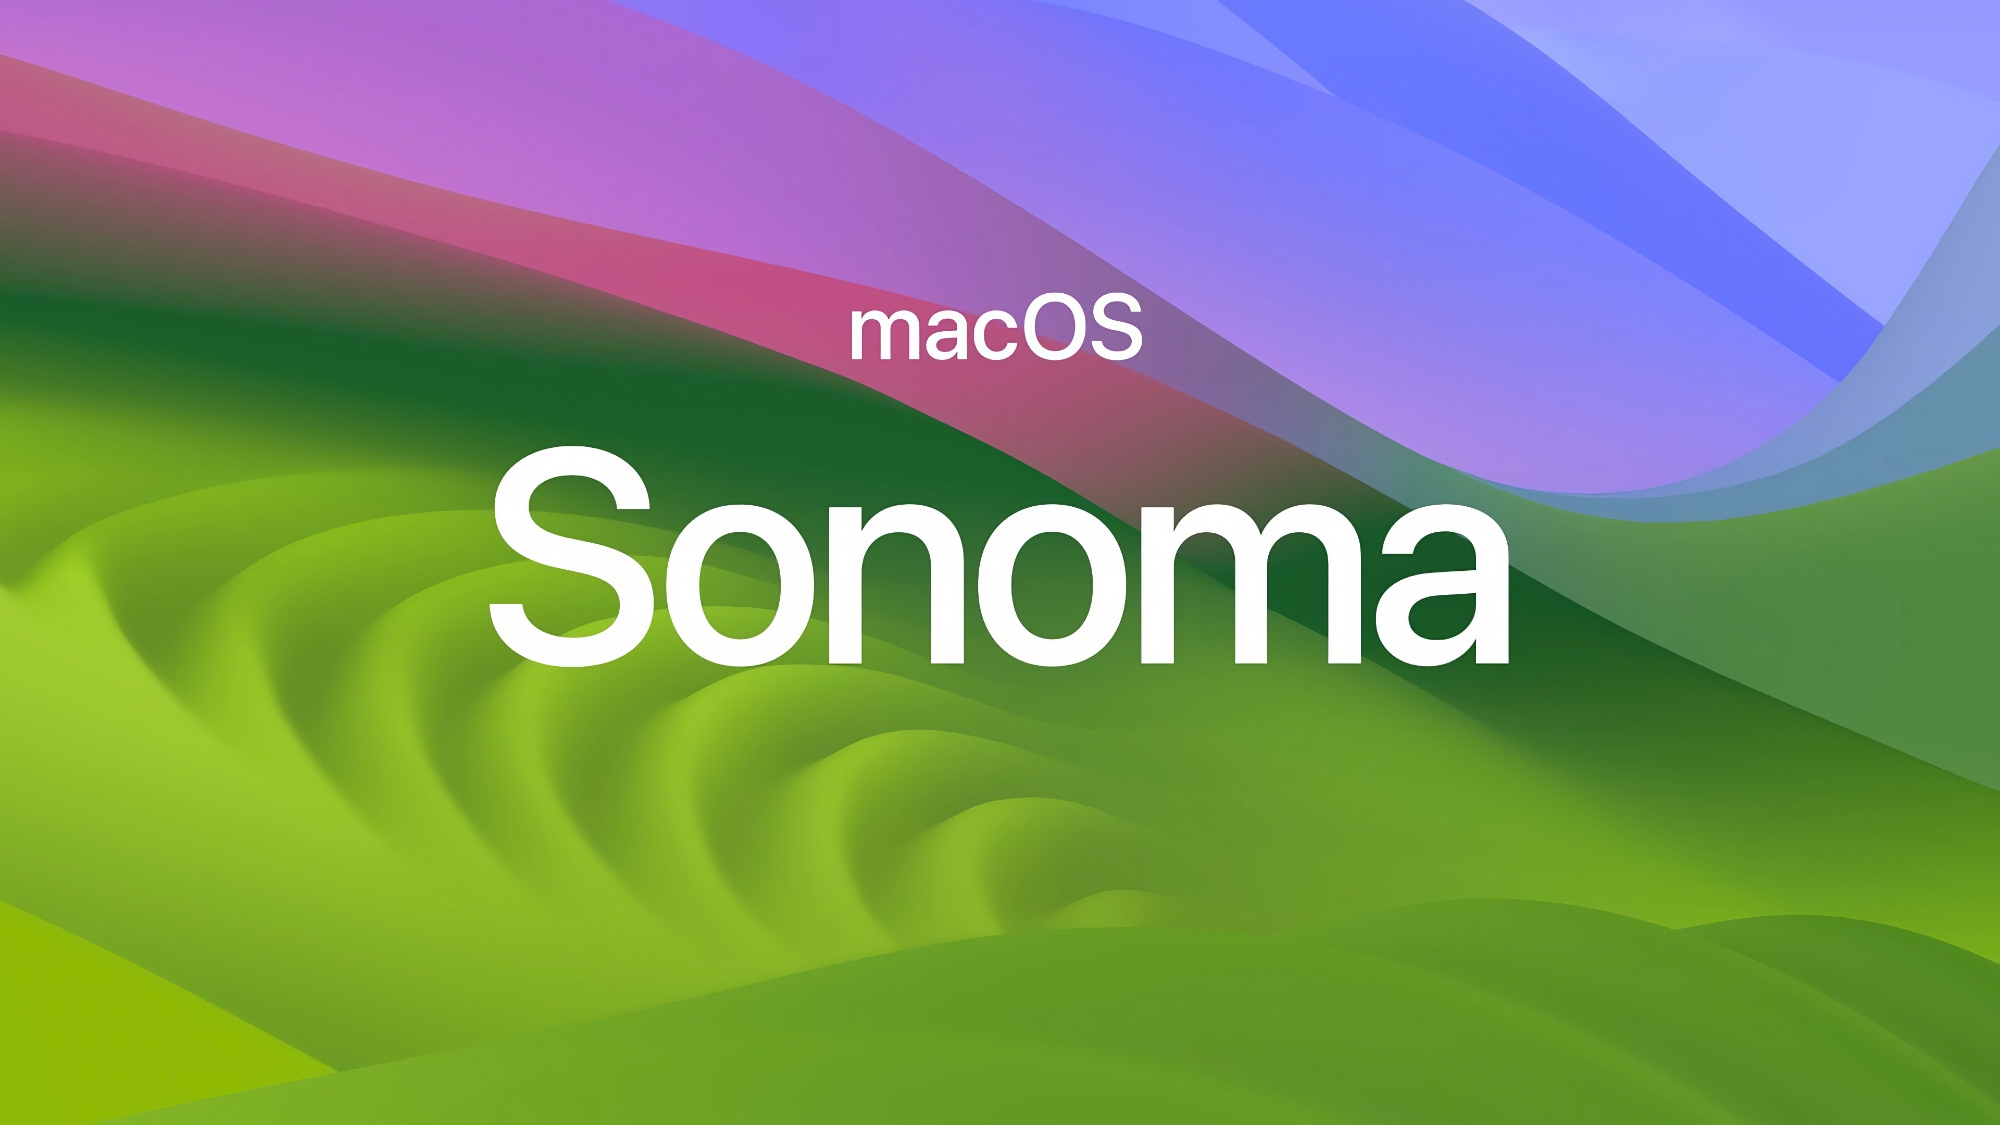 Bug fixes: Apple has released macOS Sonoma 14.3.1